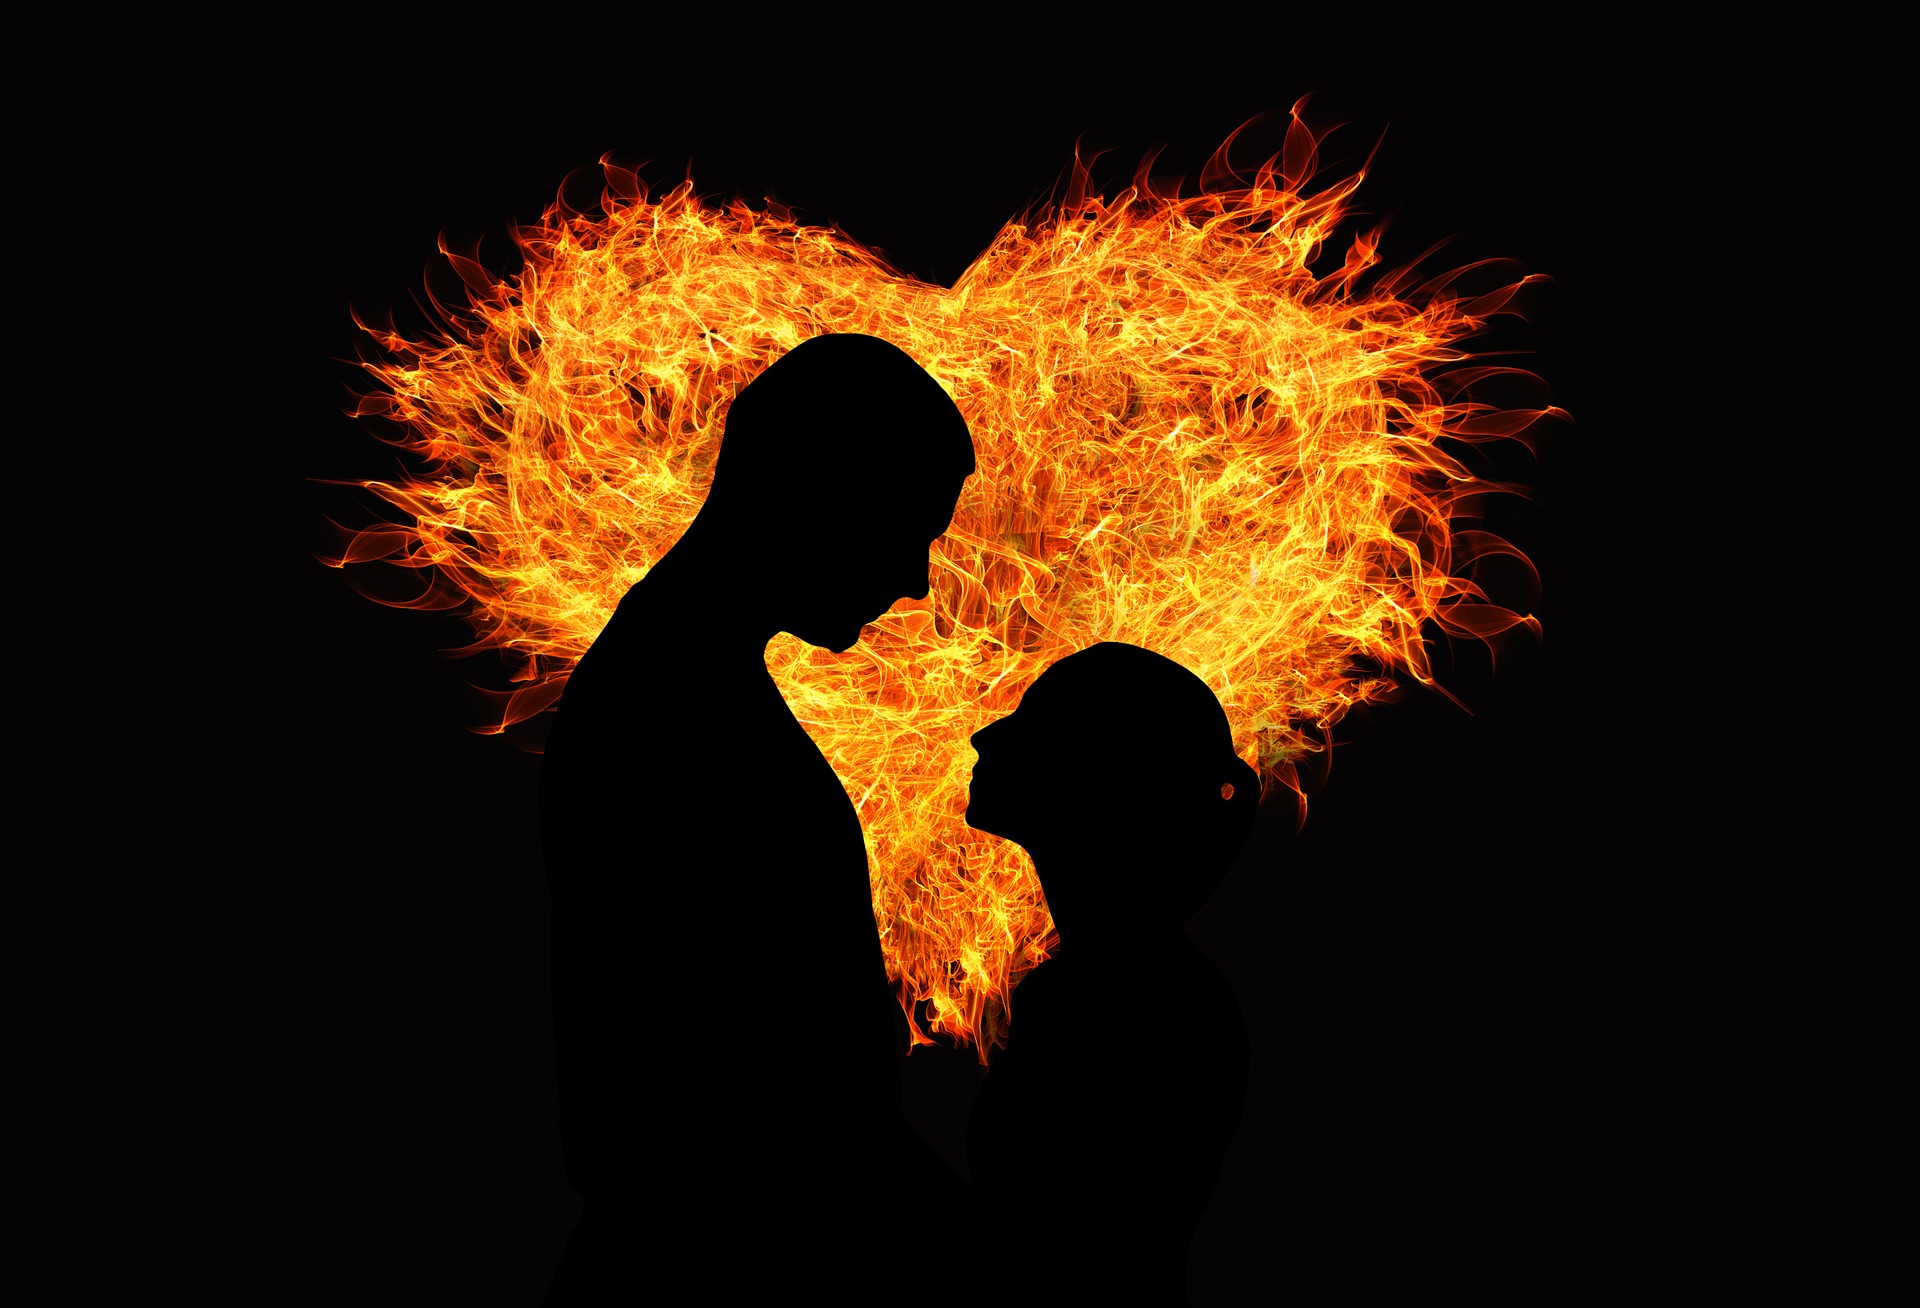 Heart of flames: Lovers in hot love